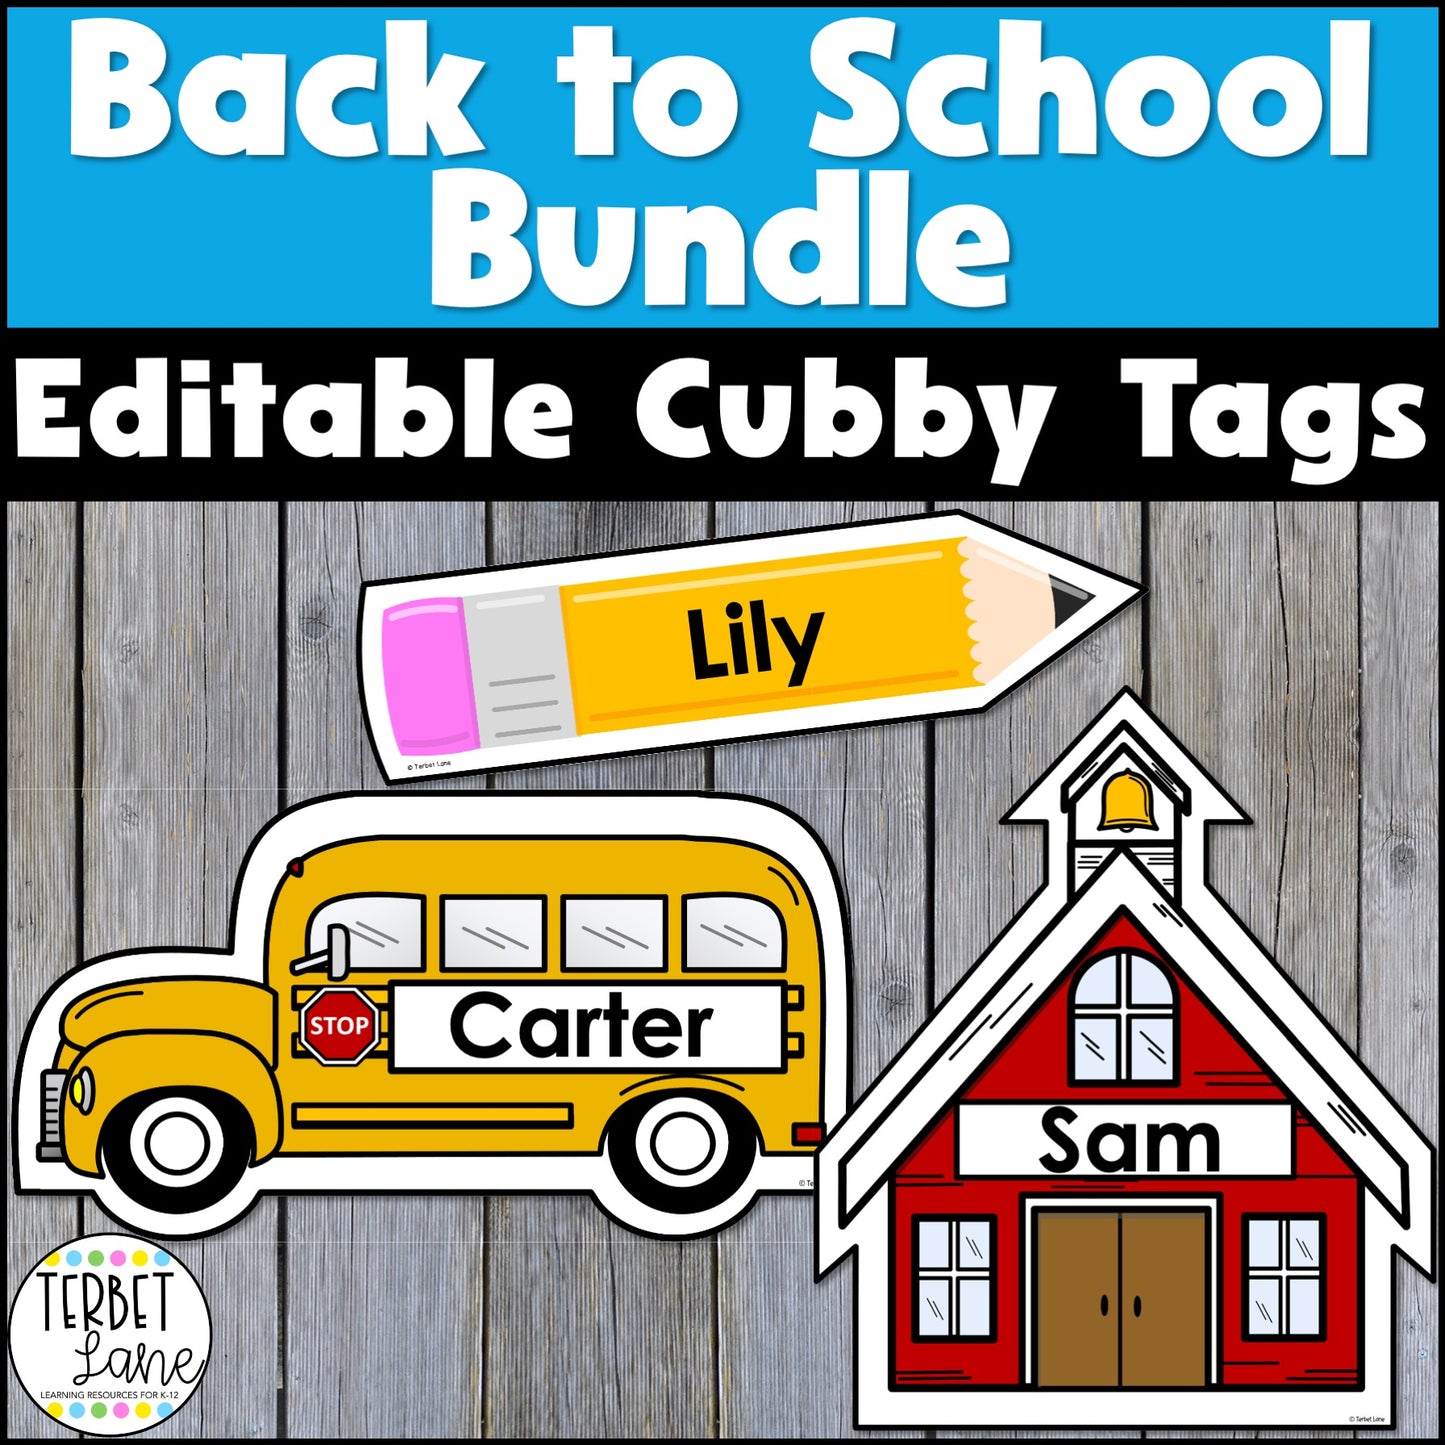 Back to School Editable Cubby Name Tag Bundle